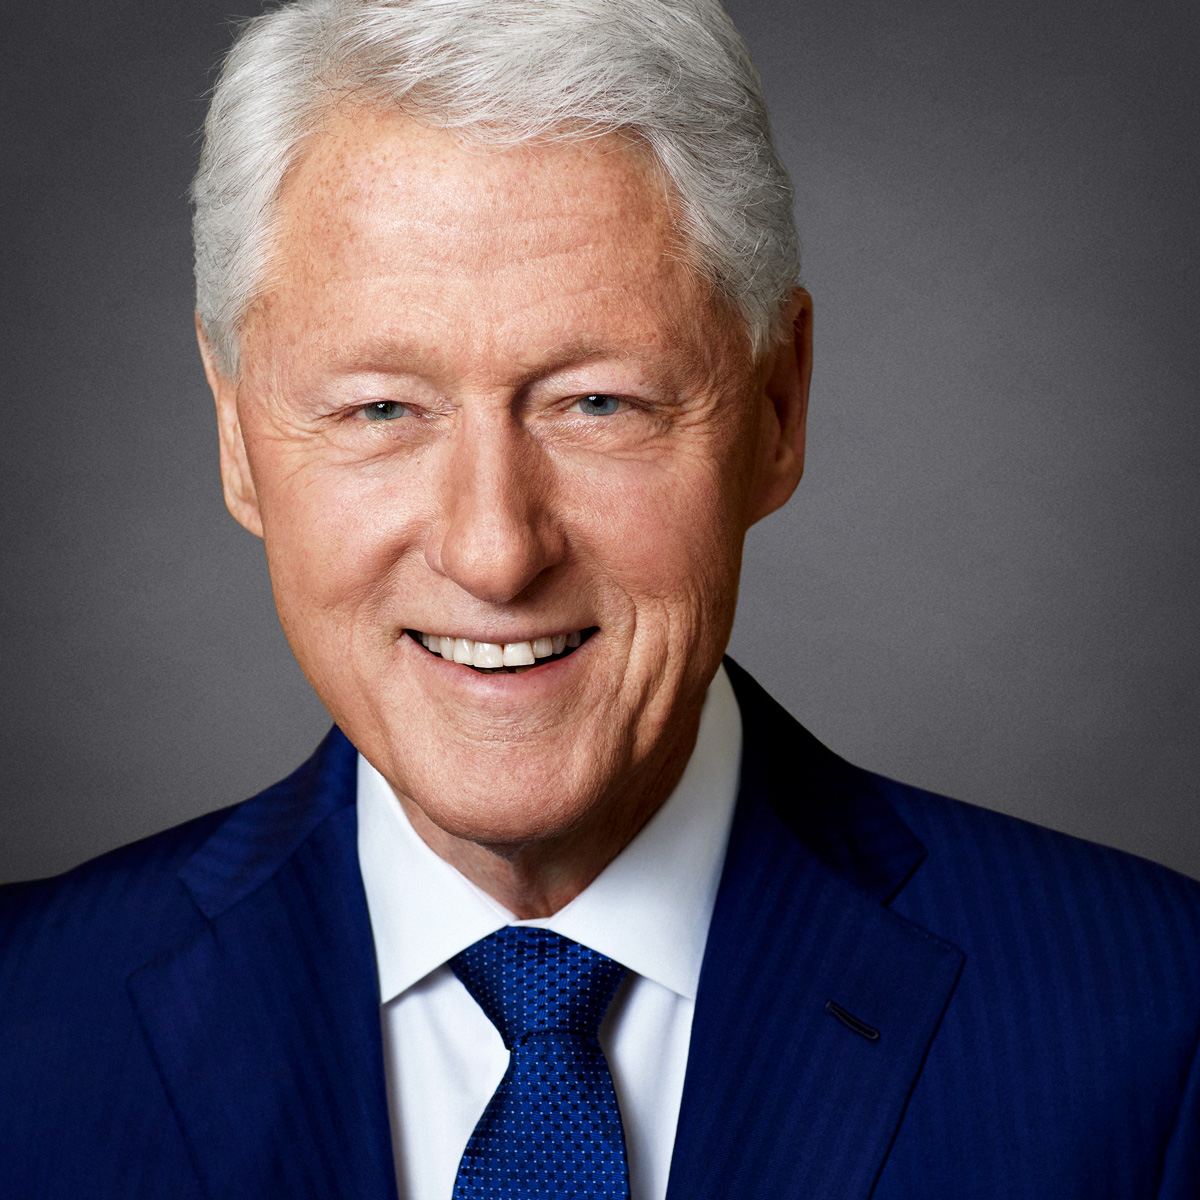 President Bill Clinton to hold a keynote speech at 10th jubilee ABSL Summit